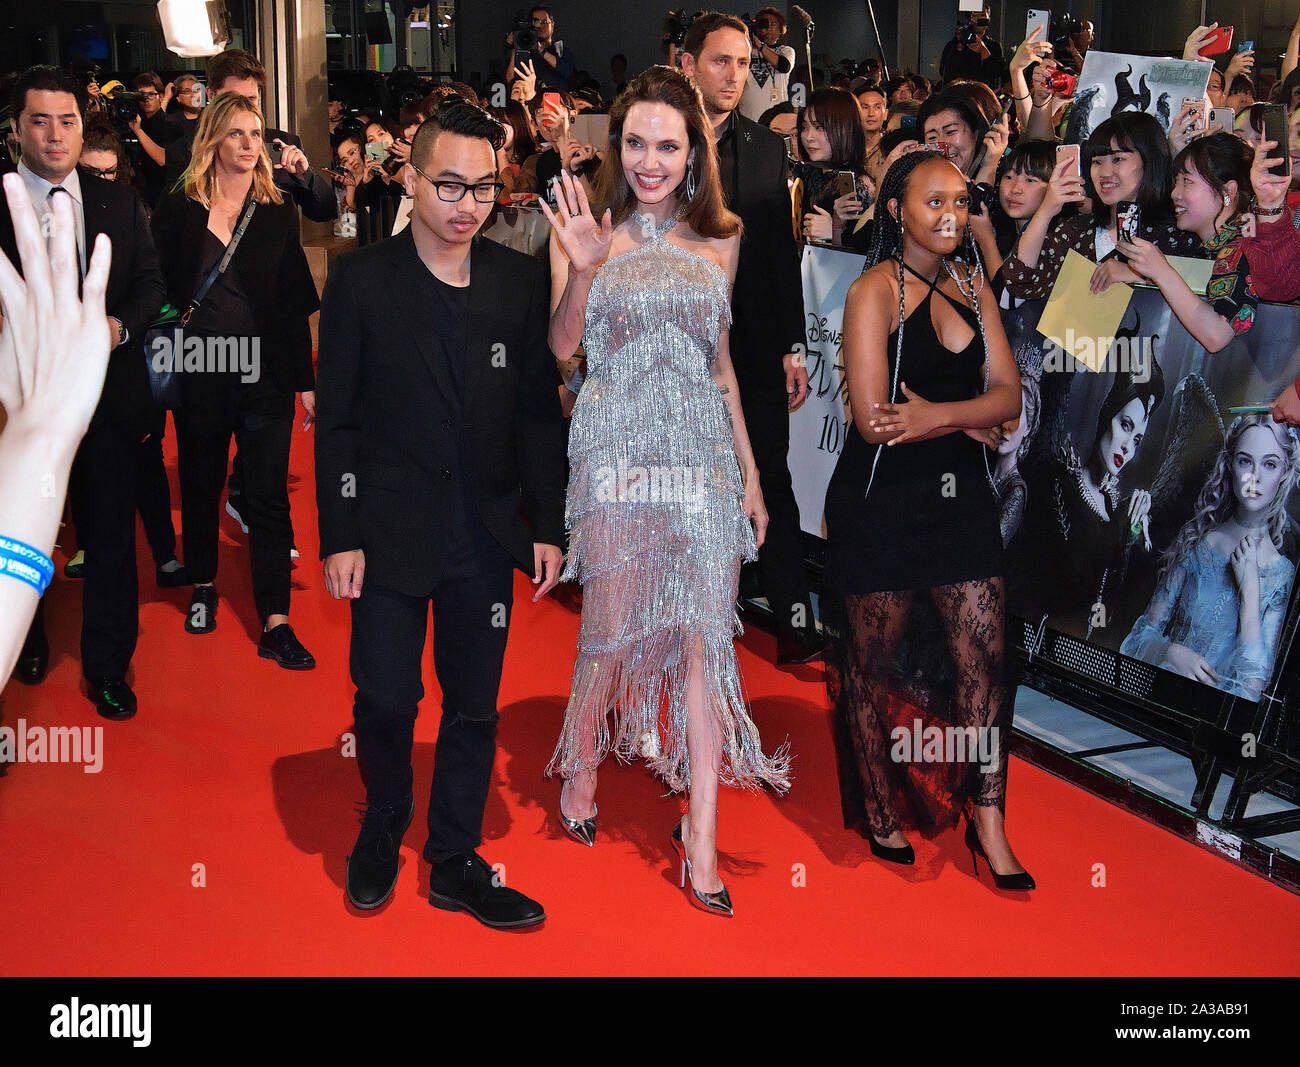 (L-R)Maddox Jolie-Pitt, Angelina Jolie and Zahara Marley Jolie-Pitt attend the Japan premiere for 'Maleficent: Mistress of Evil' at Roppongi Hills Arena in Tokyo, Japan on October 3, 2019. Credit: AFLO/Alamy Live News Stock Photo